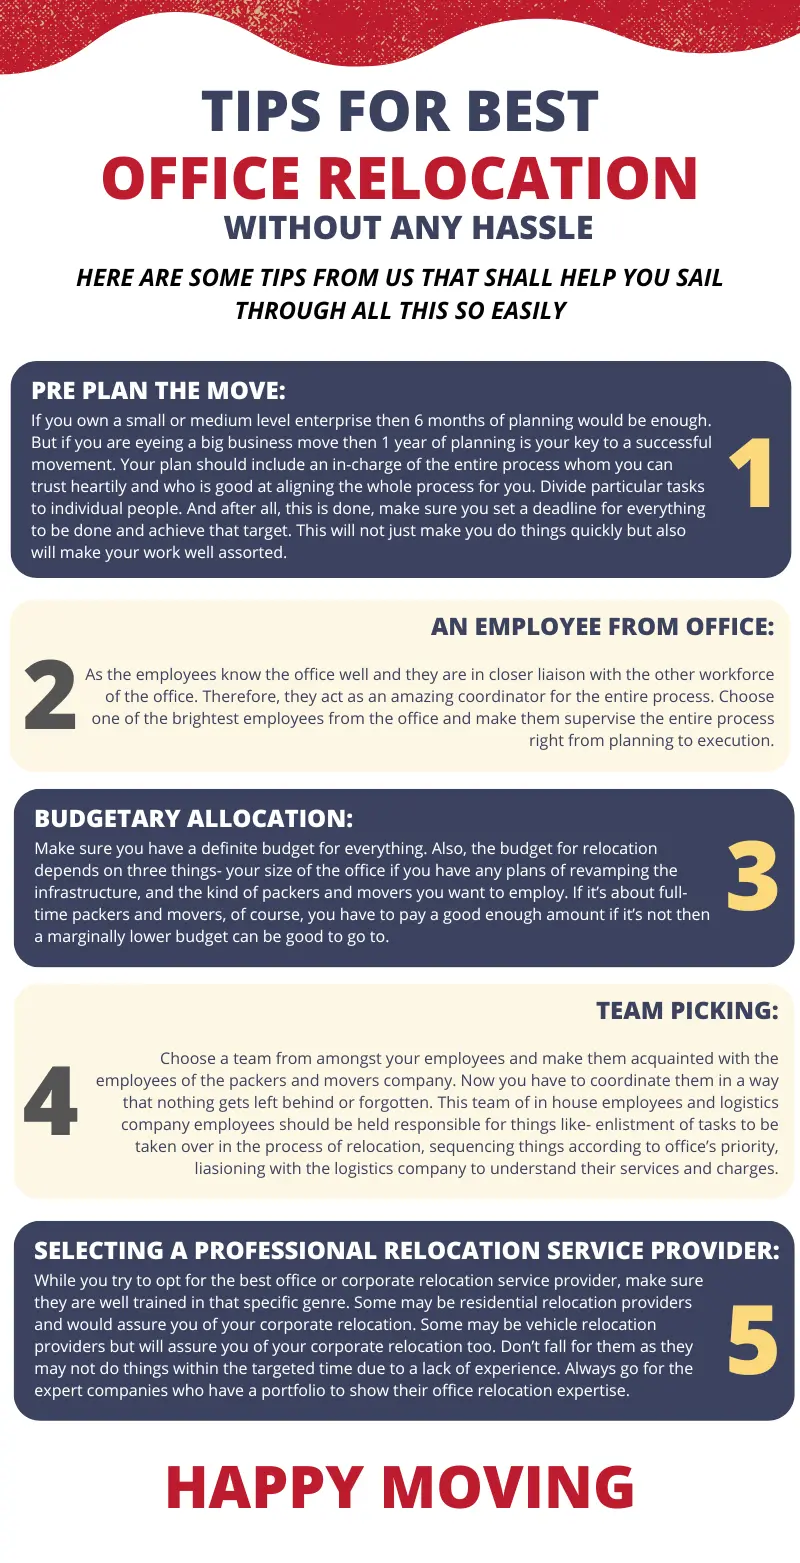 Tips For Best Office Relocation Without Any Hassle Informational Infographic